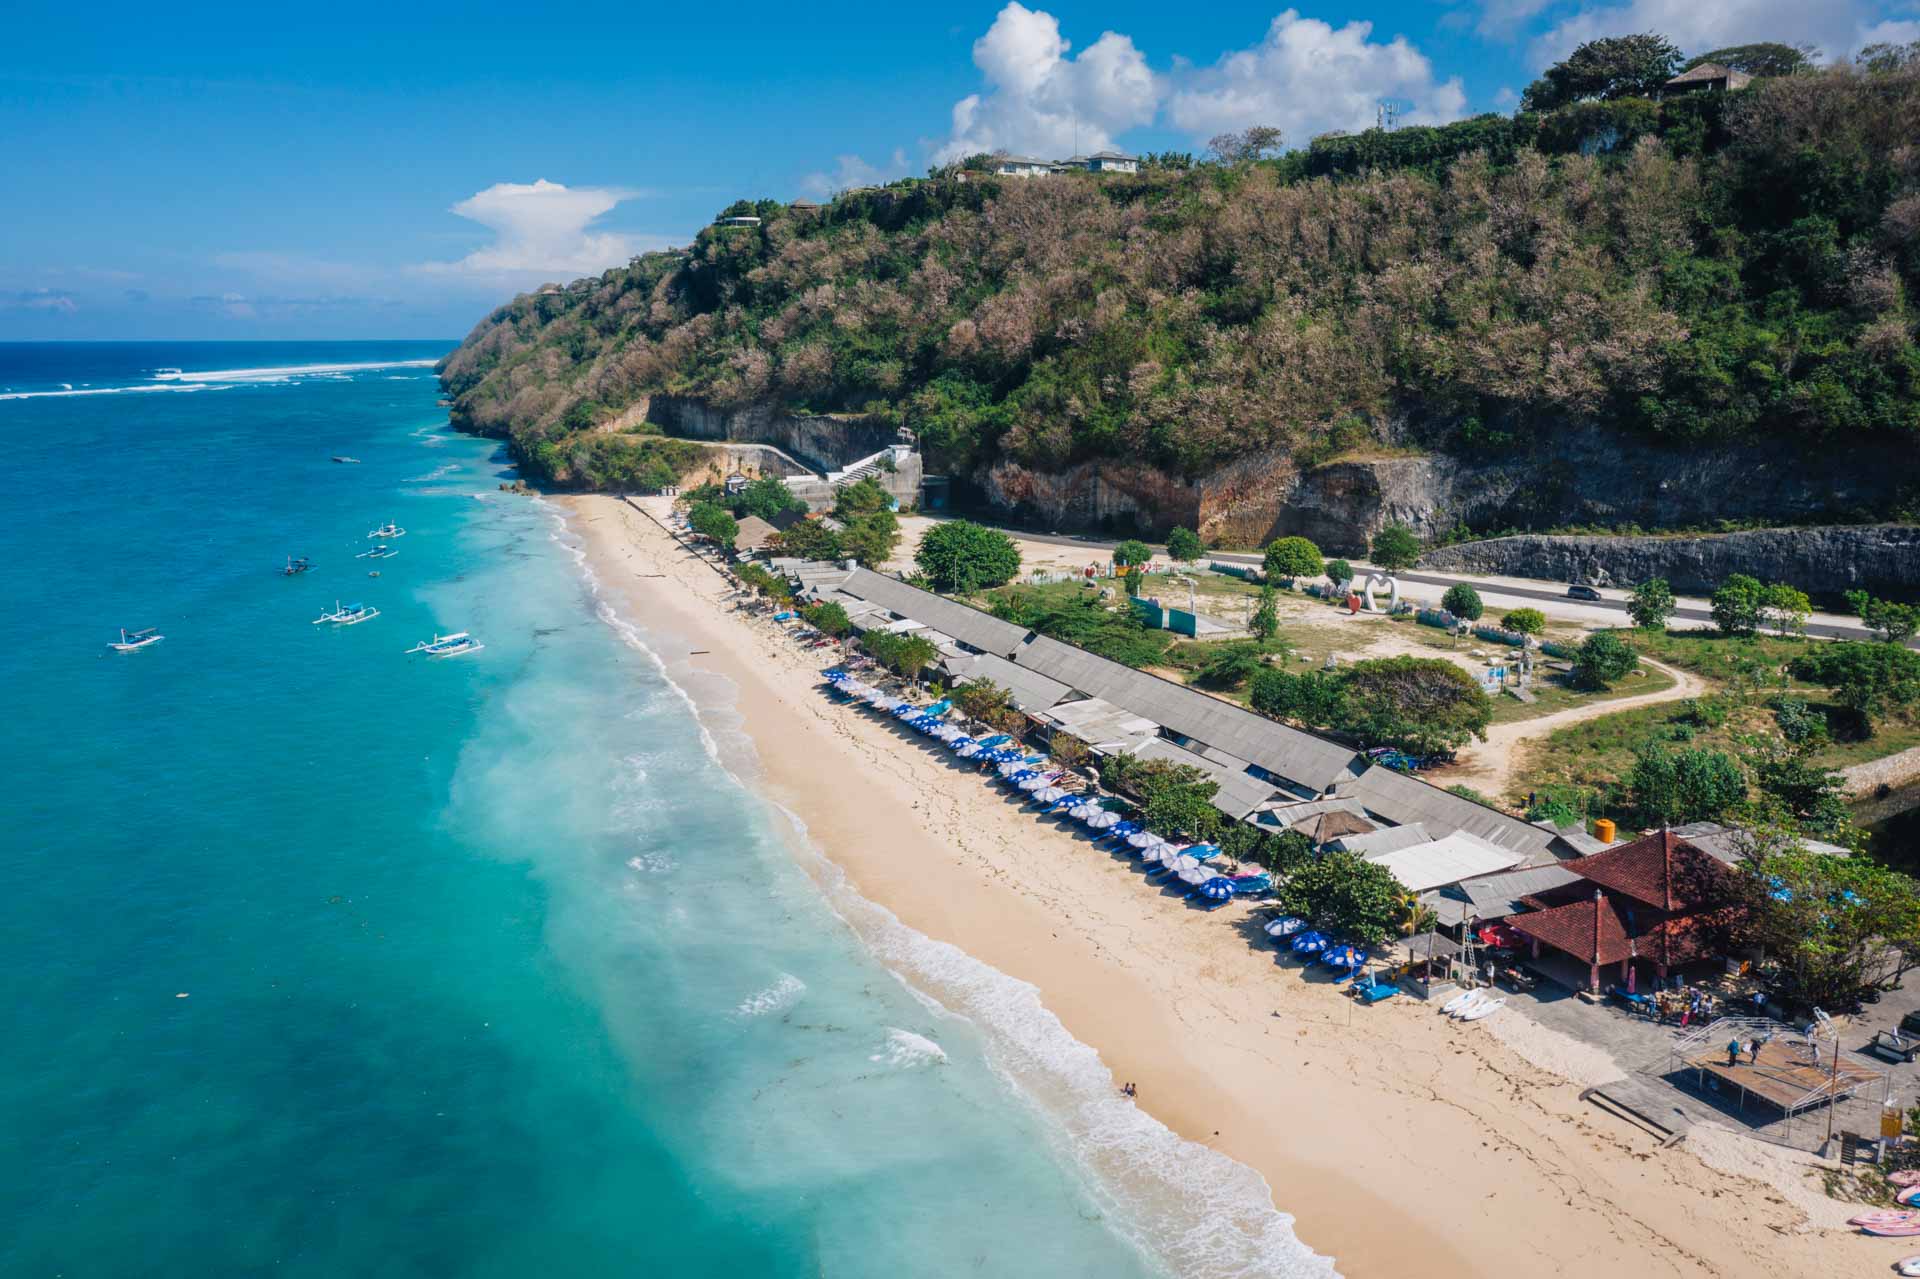 Beaches in Bali for Swimming